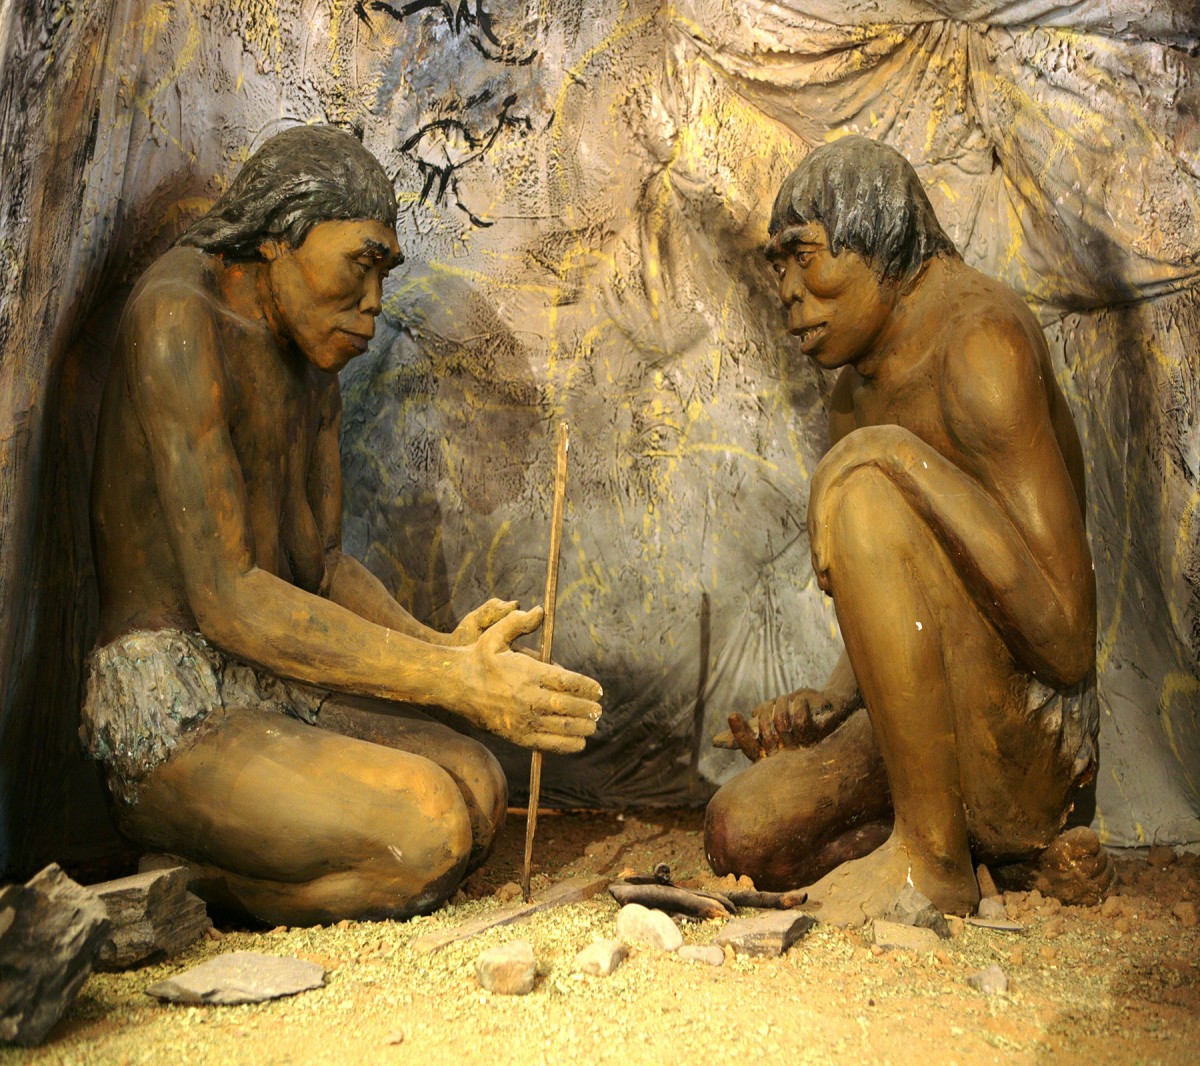 A Diorama showing ancient cavemen stands inside the National Museum of Mongolian History in Ulaanbaatar, Mongolia. The museum preserves the Mongolian cultural heritage.